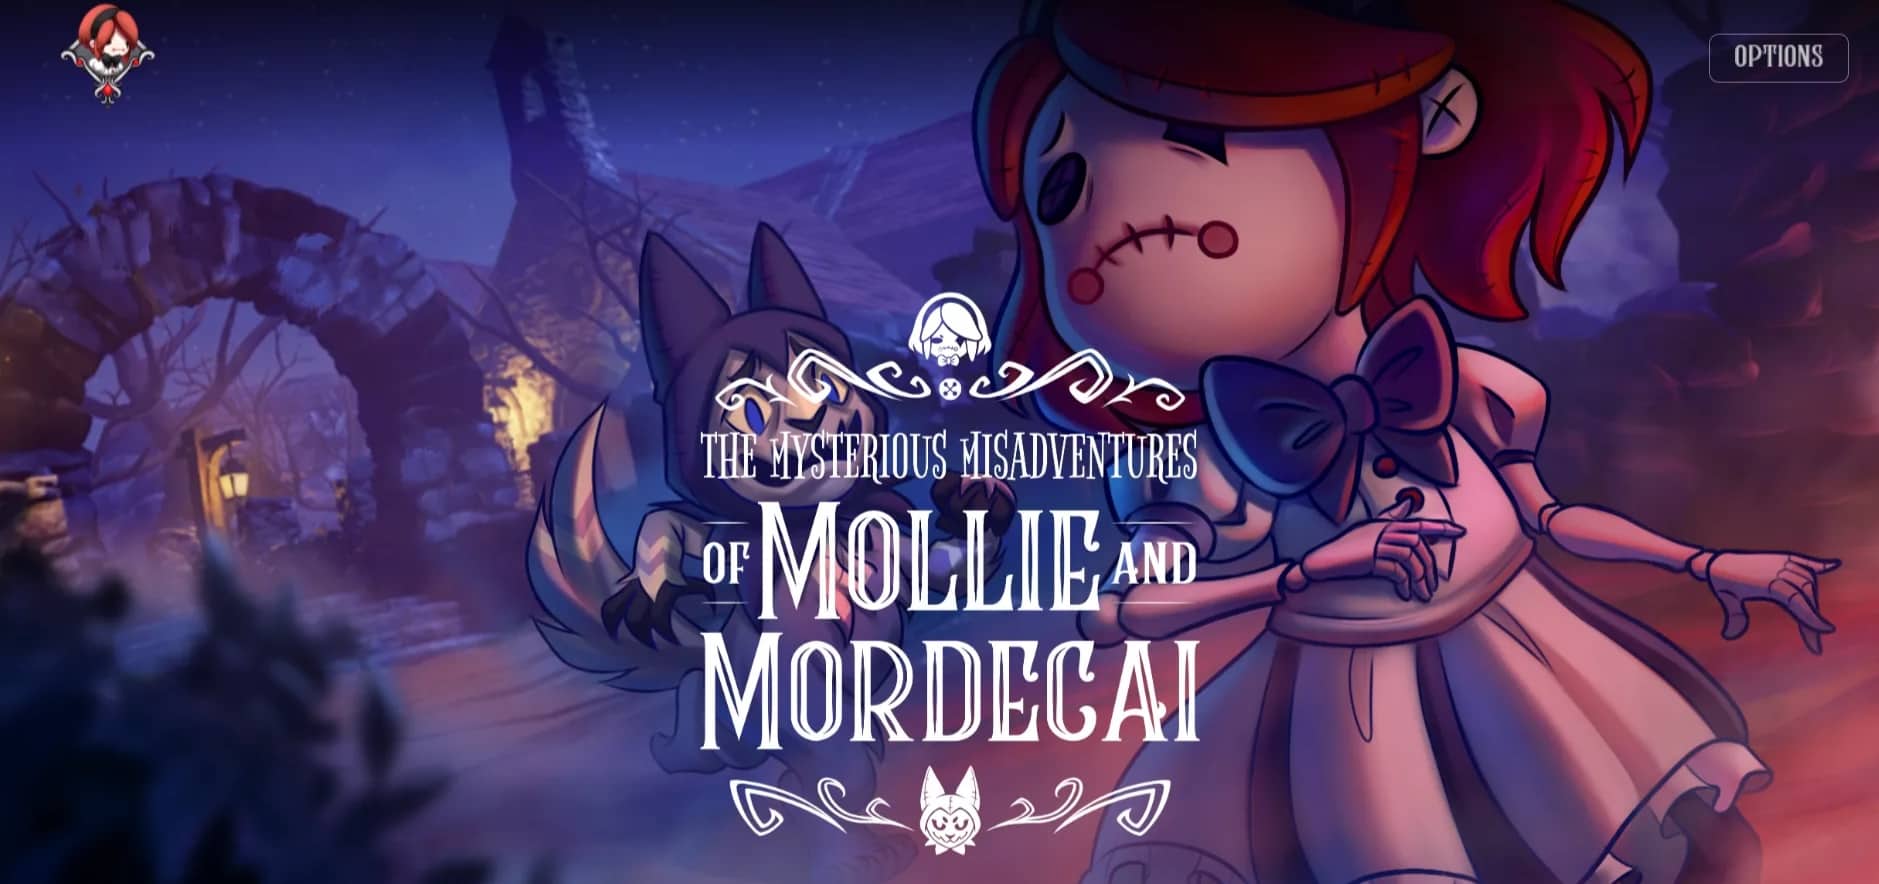 The Mysterious Misadventures of Mollie & Mordecai